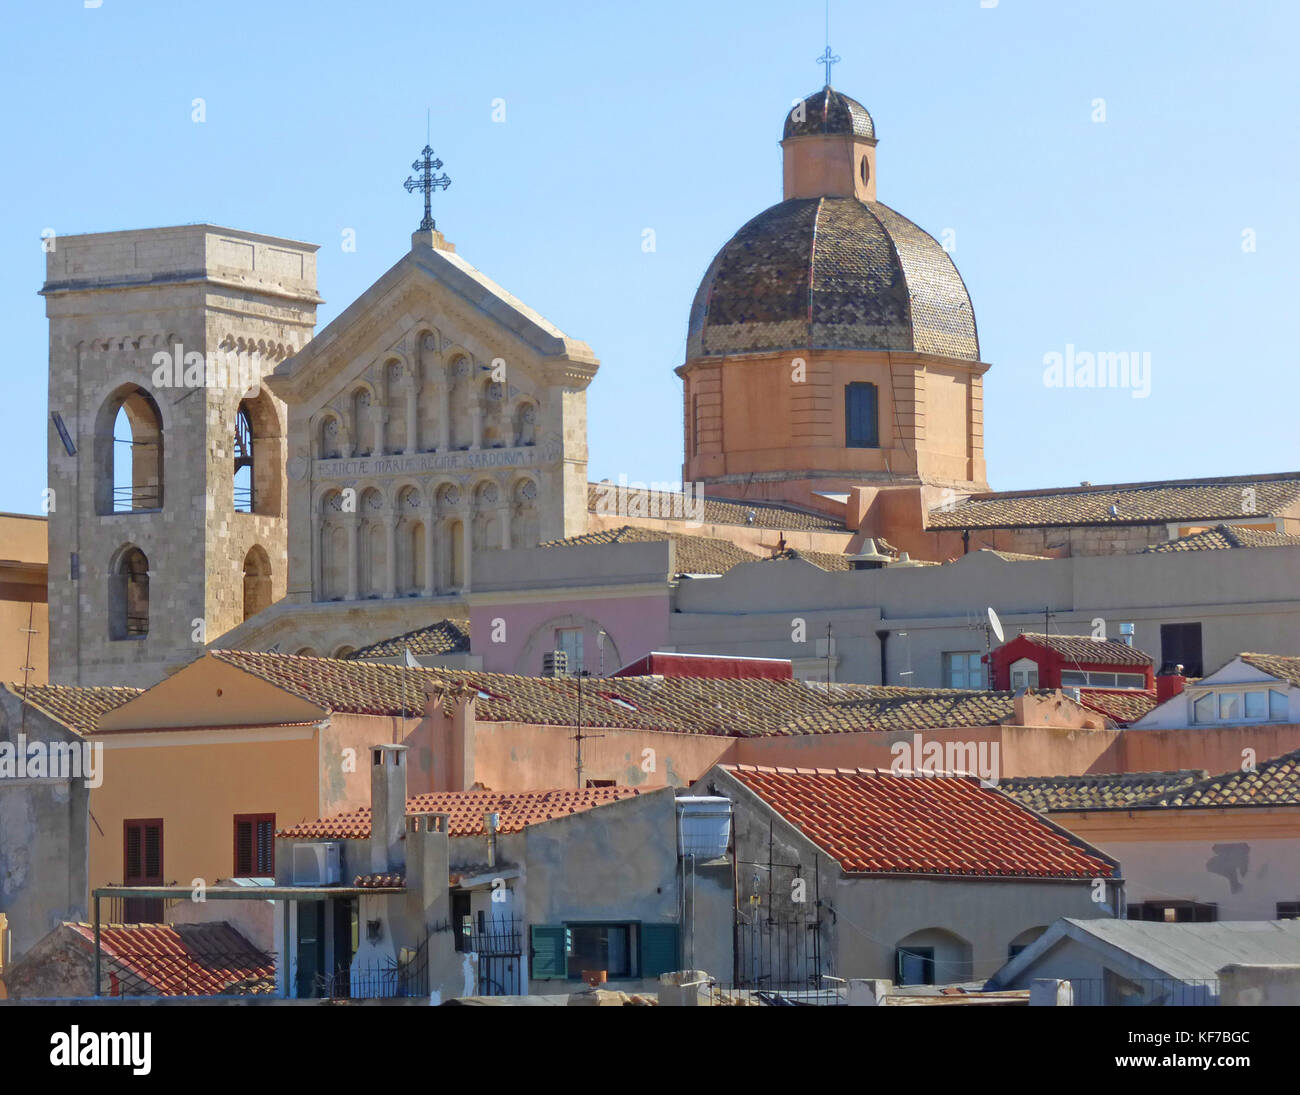 The old Citadel of Cagliari, Sardinia, with the Cathedral and its dome dominating the roof-tops Stock Photo